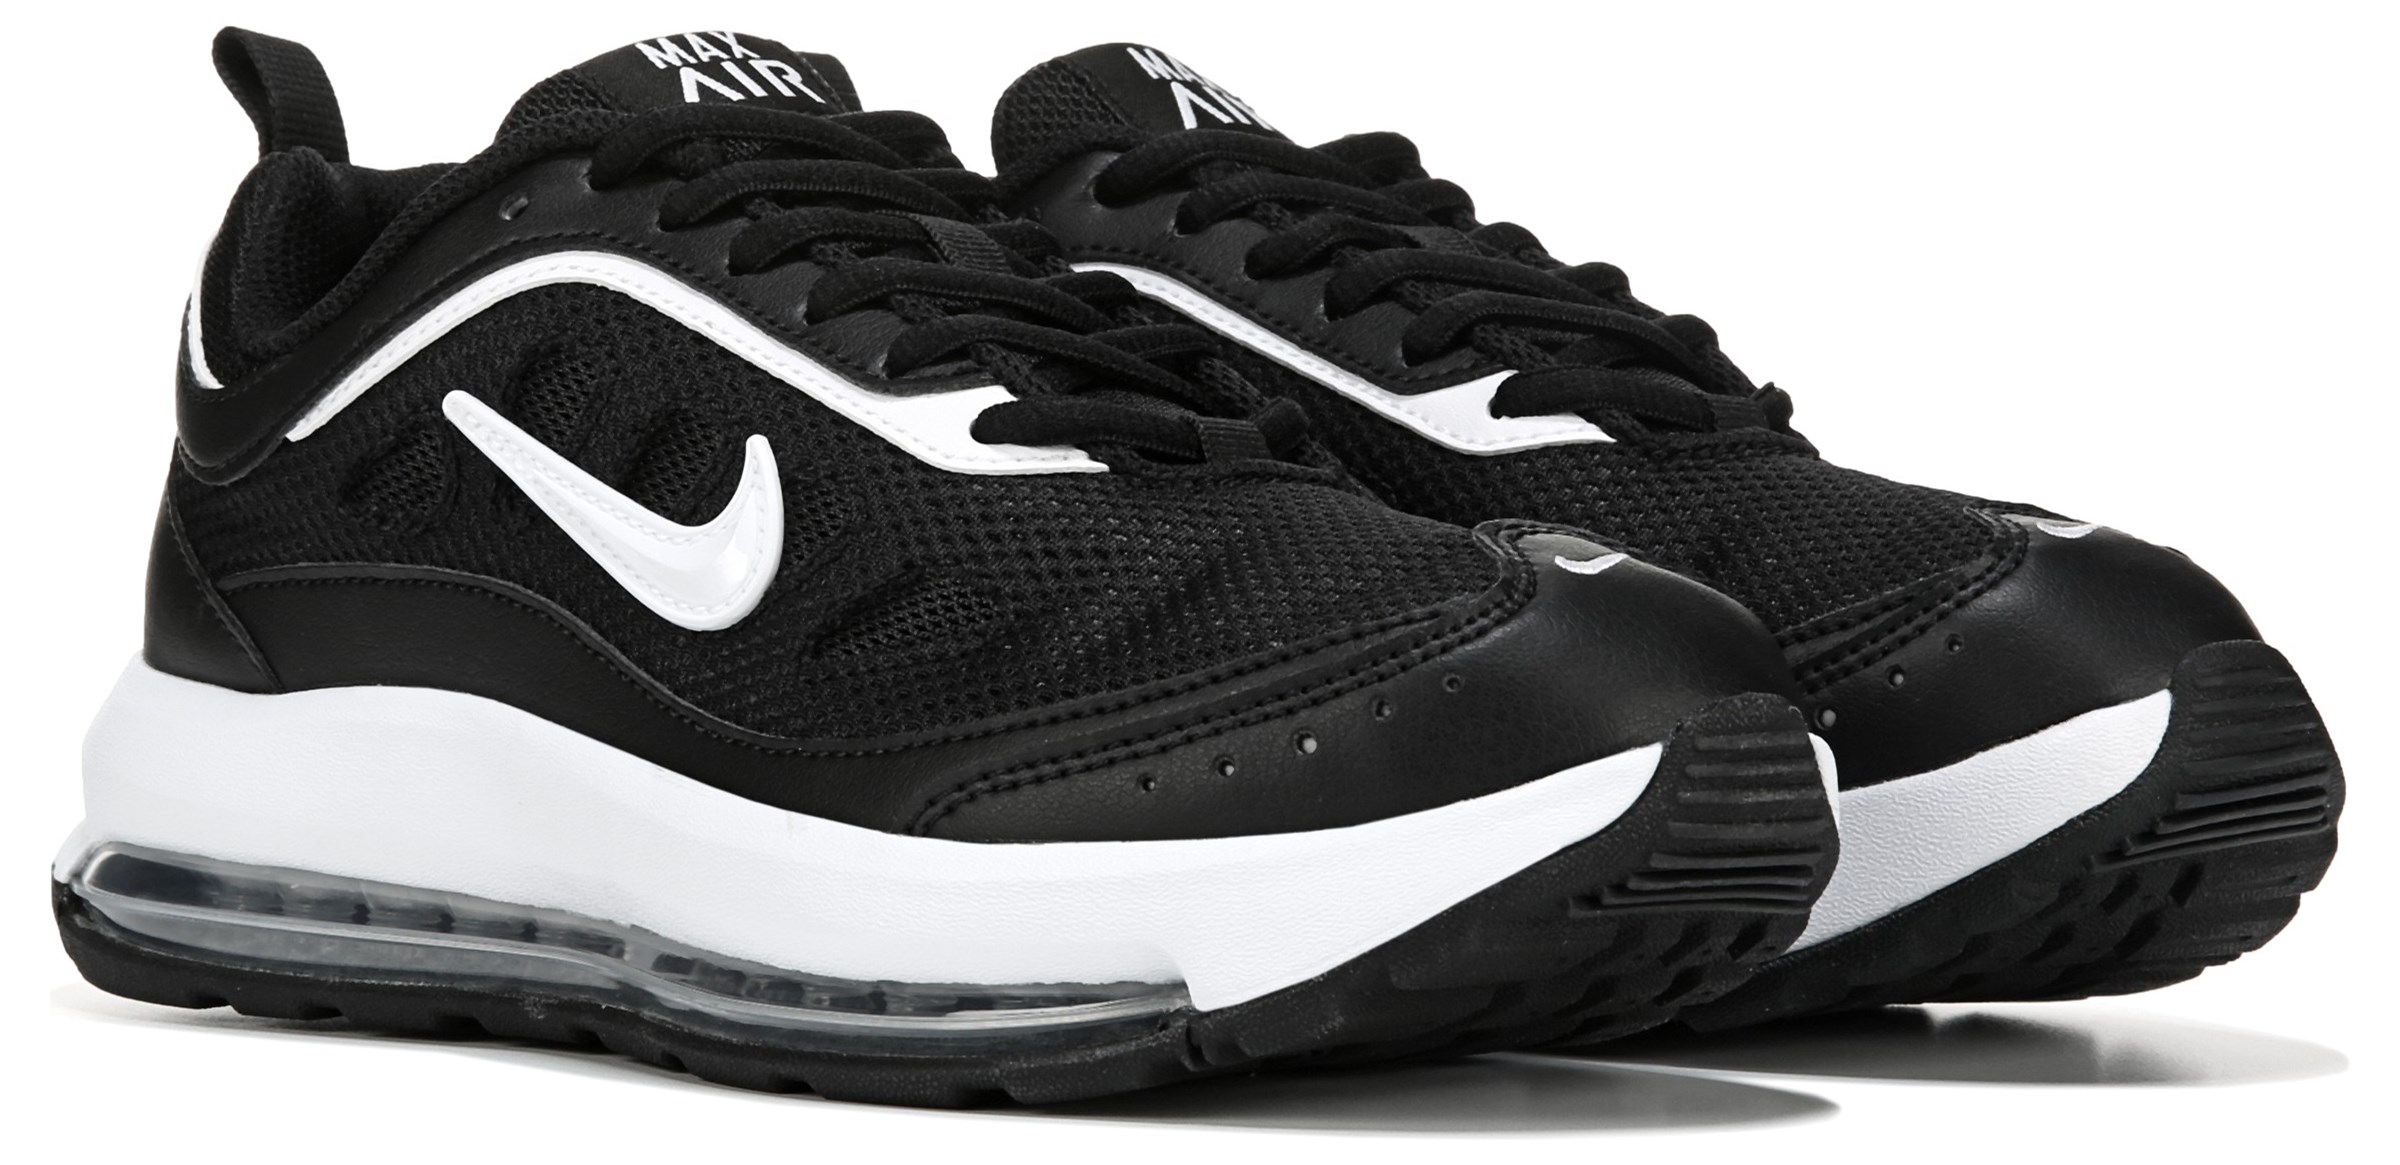 Nike Women's max shoes for women Air Max AP Sneaker, Sneakers and Athletic Shoes